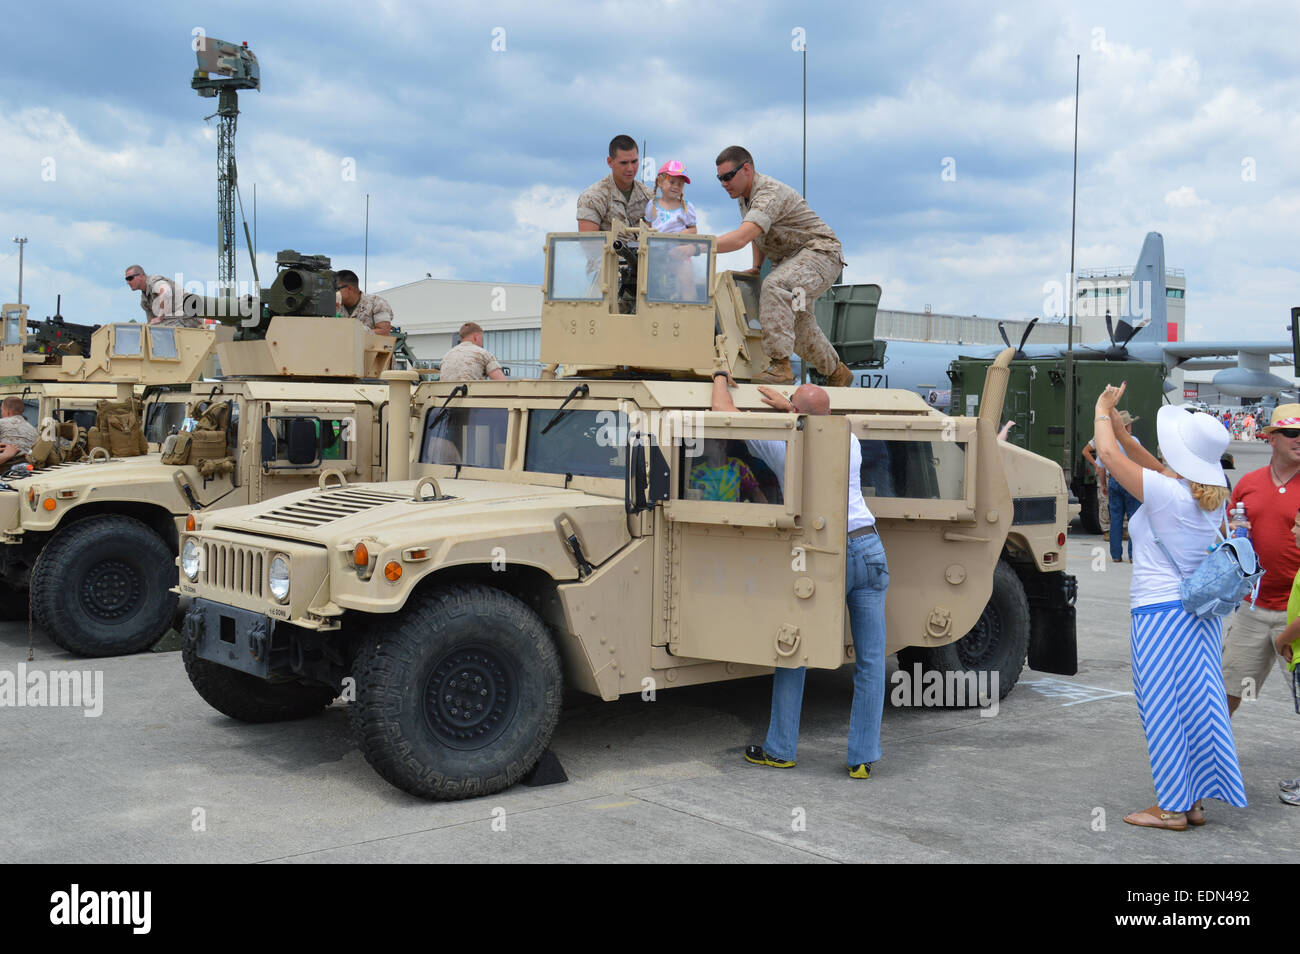 A  armored Humvee on display at the MCAS Air Show. Stock Photo